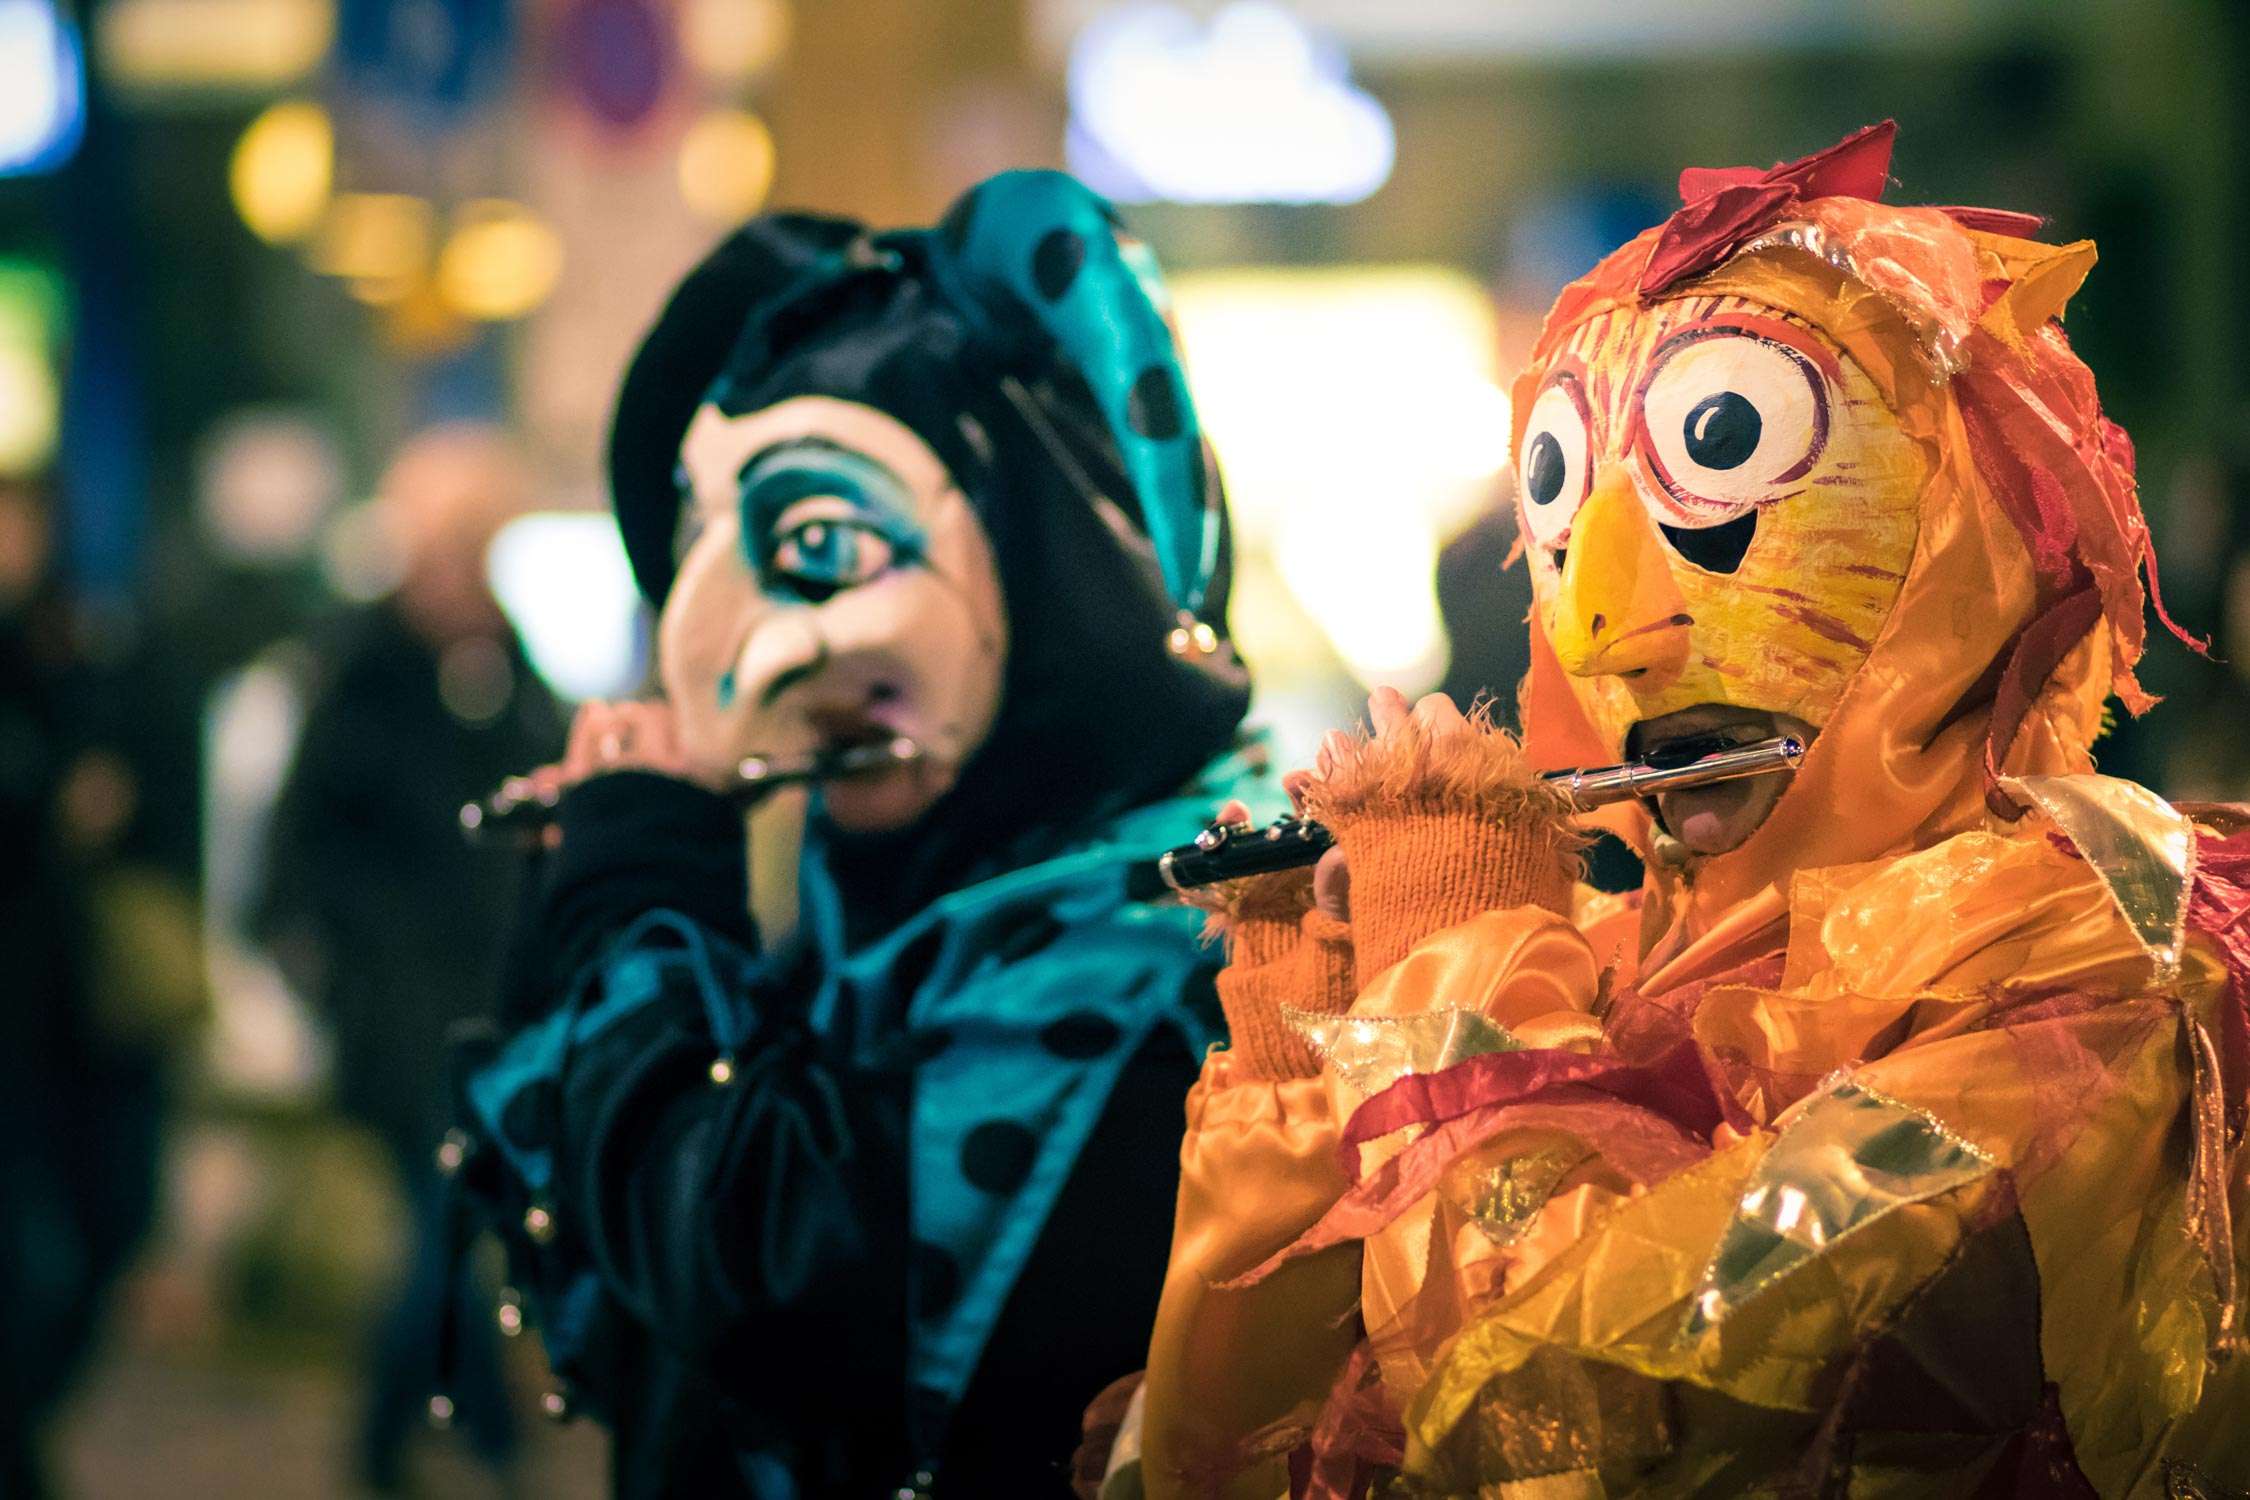 People wear masks while playing a wind instrument during the Fasnacht